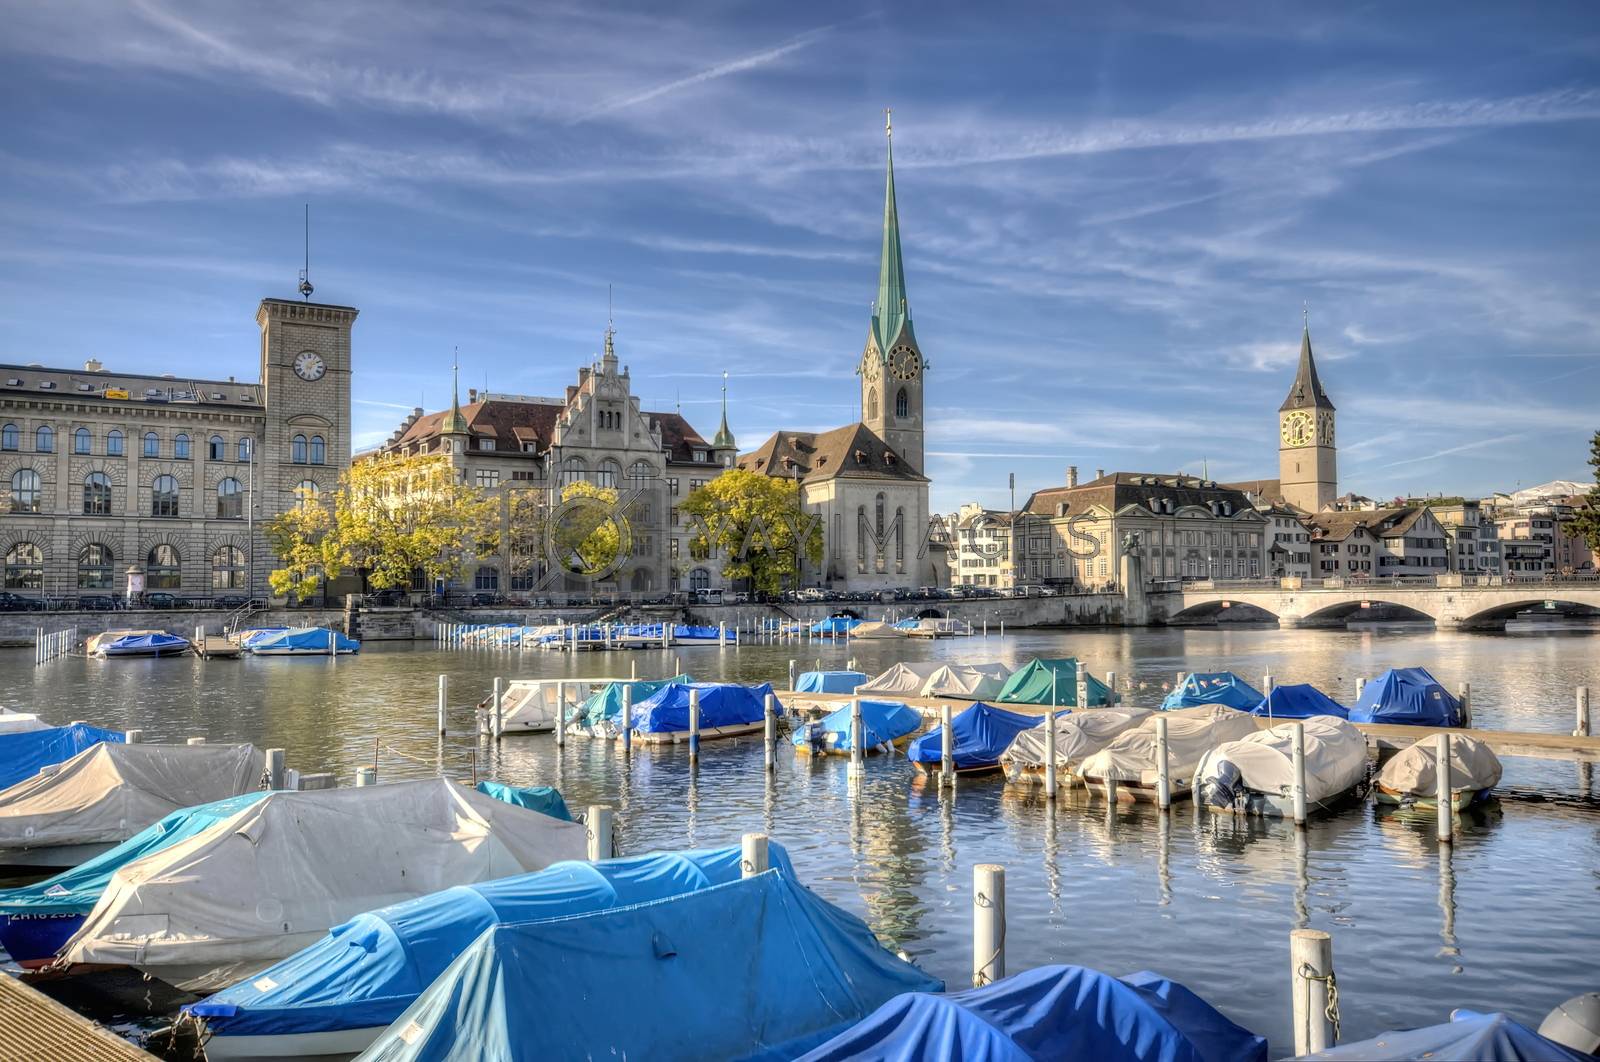 Royalty free image of Center of Zurich, Switzerland by anderm